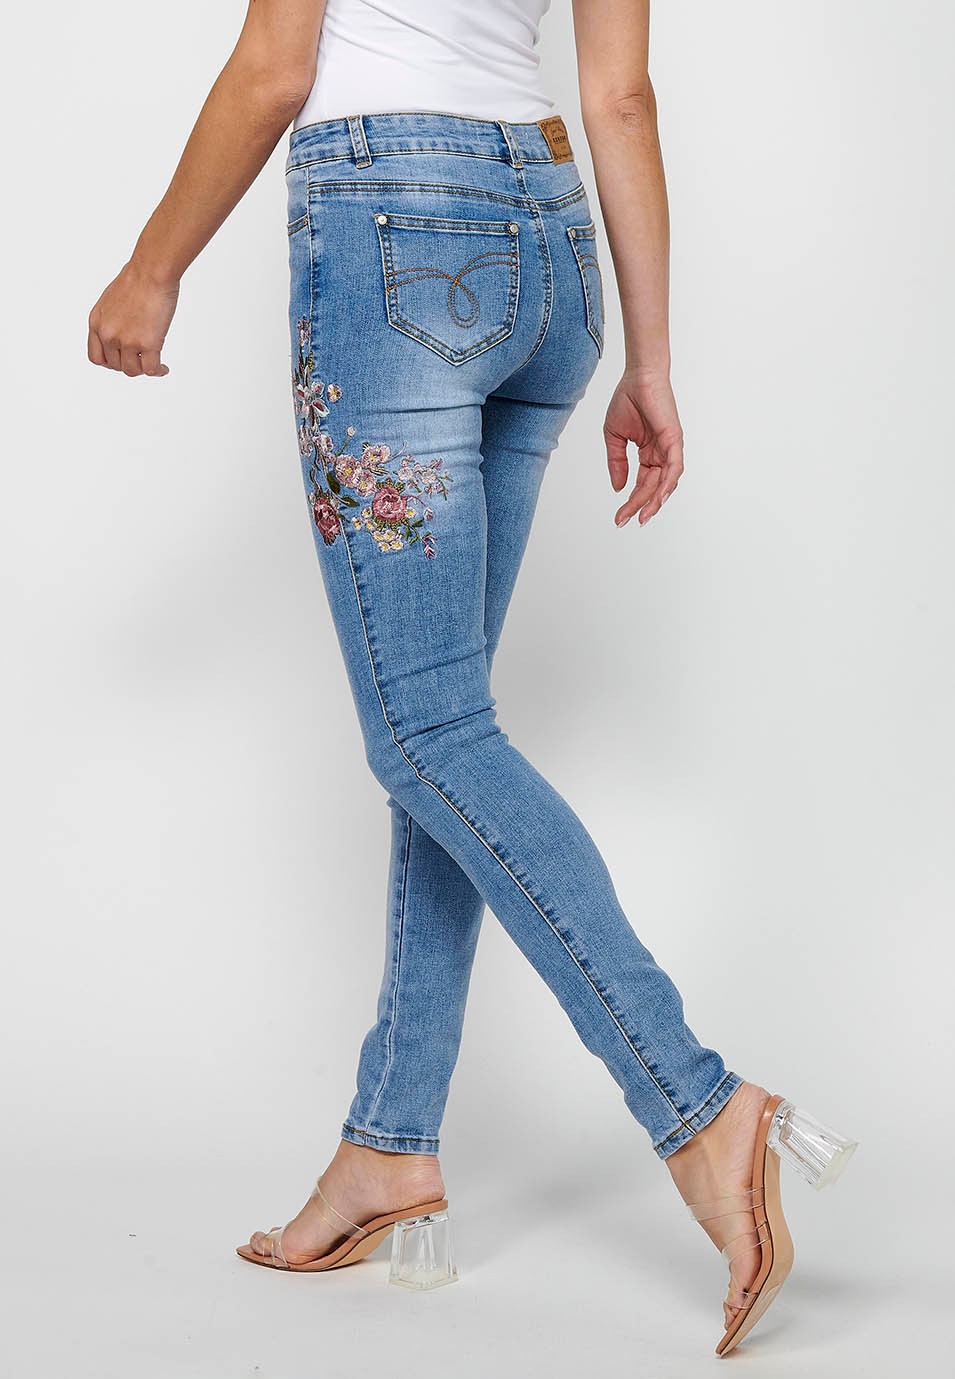 Slim long pants with front zipper and button closure with embroidered details in Blue for Women 5